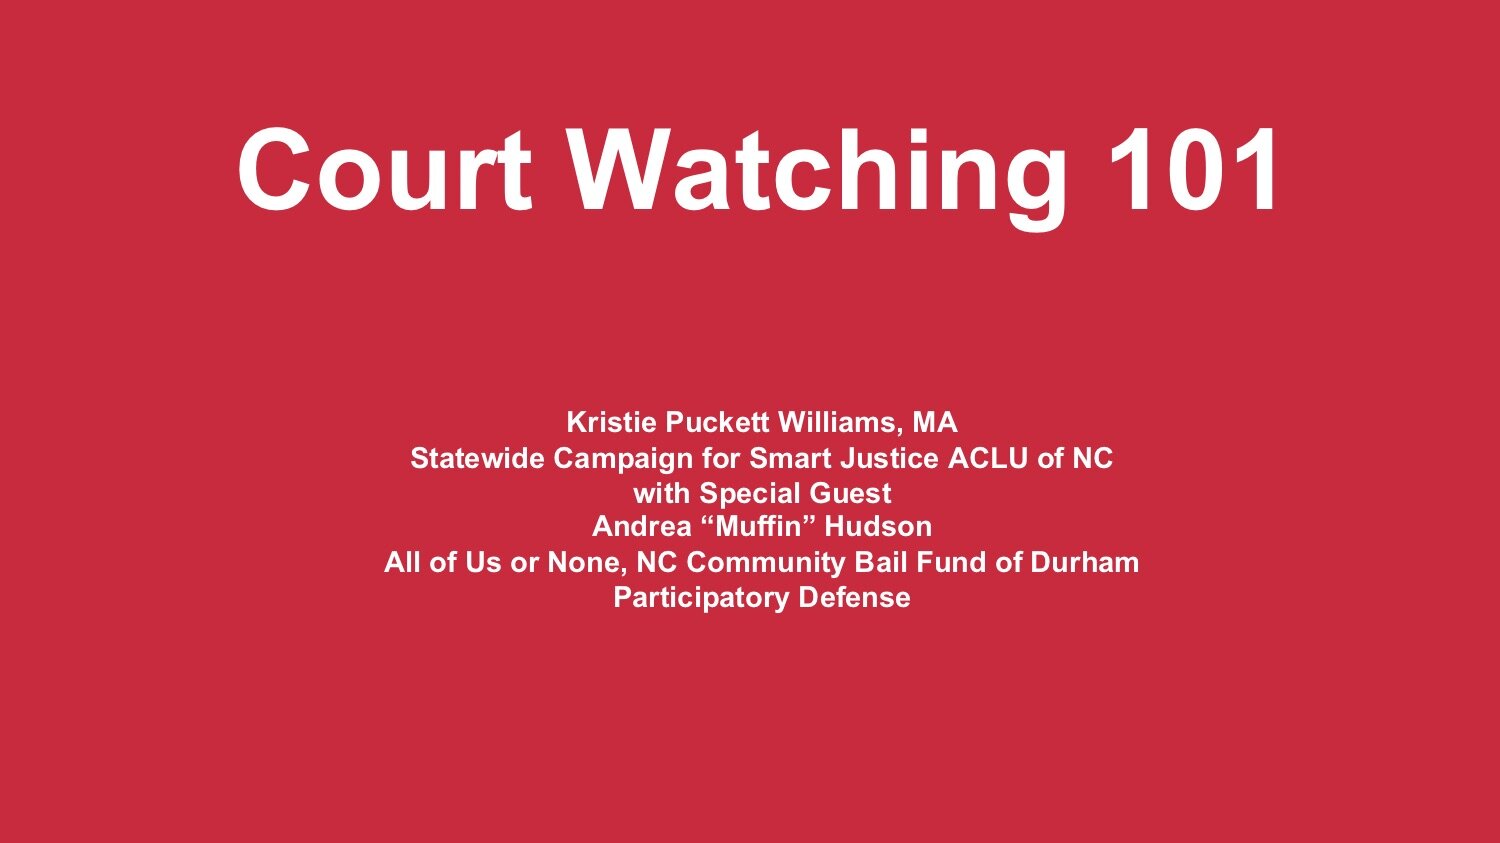 Courtwatching 101 PowerPoint 